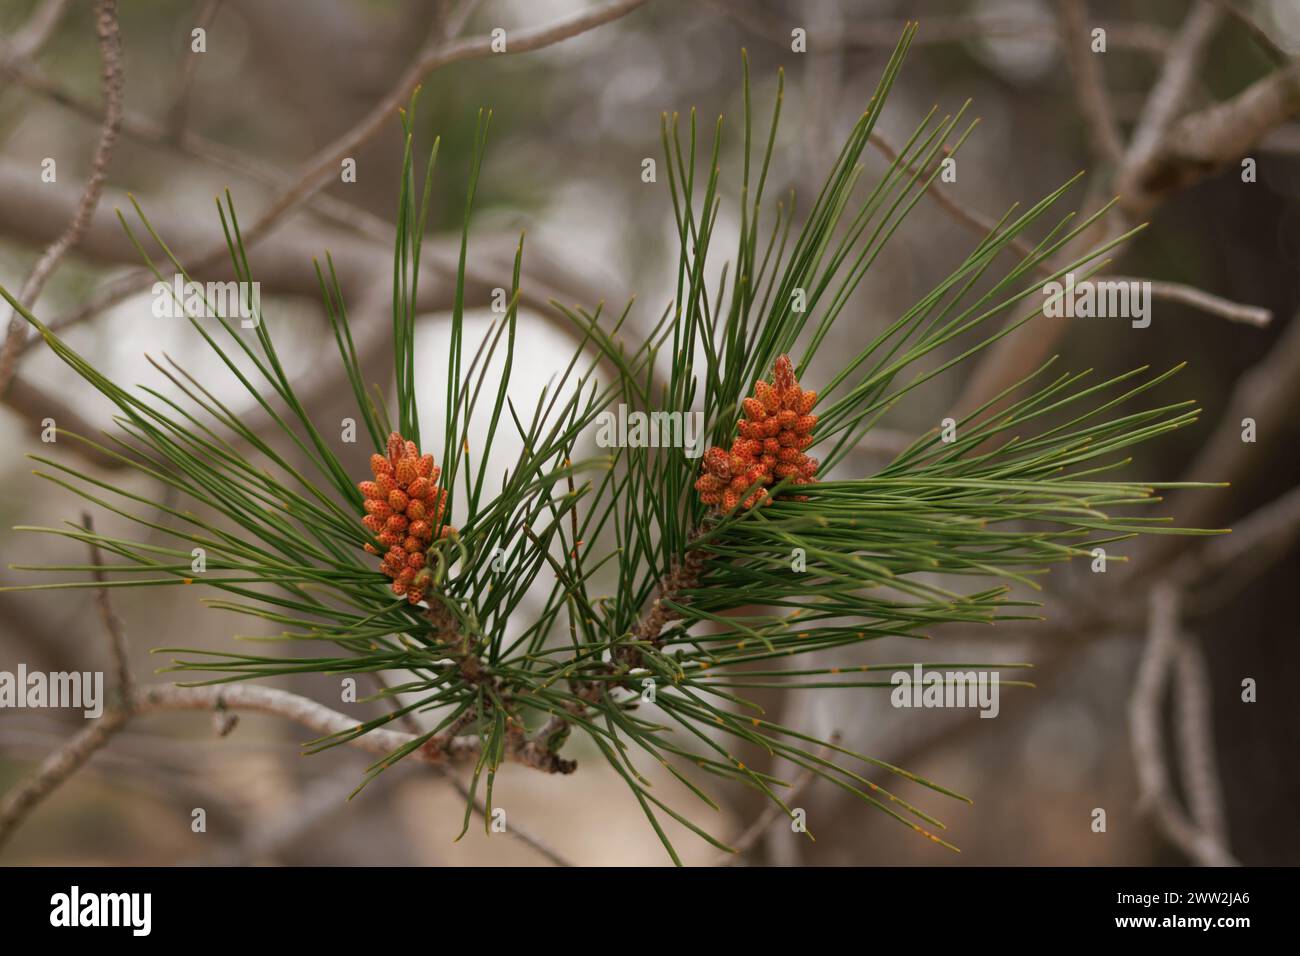 Cone shoots of Aleppo pine or Aleppo pine, pinus halepensis, in spring Stock Photo